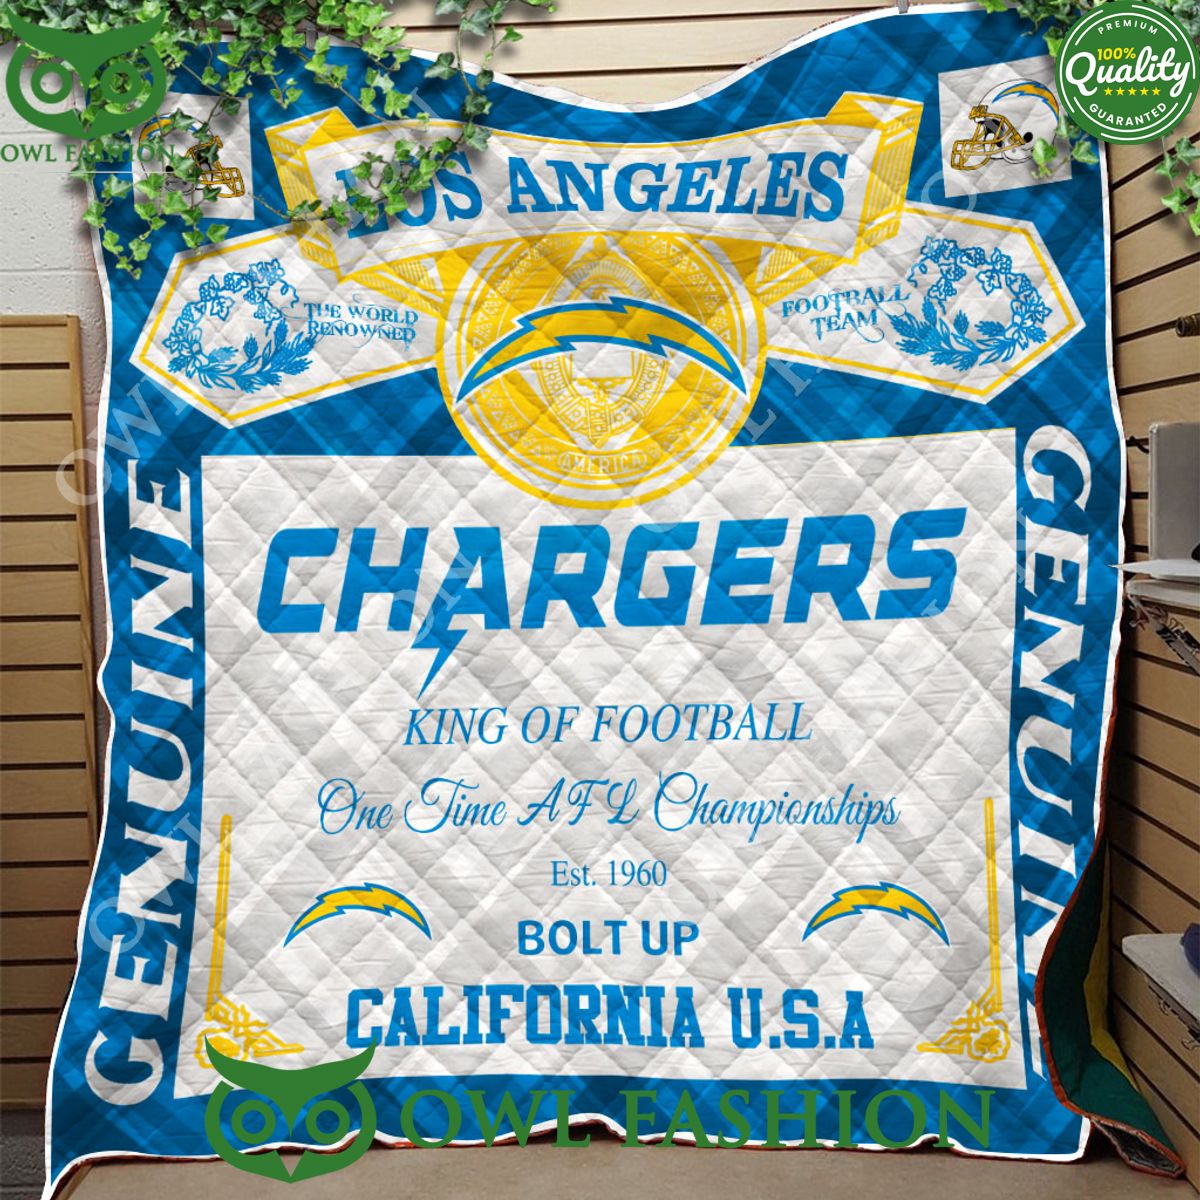 los angeles chargers bolt up california king of football 1960 quilt blanket 1 ykmMU.jpg